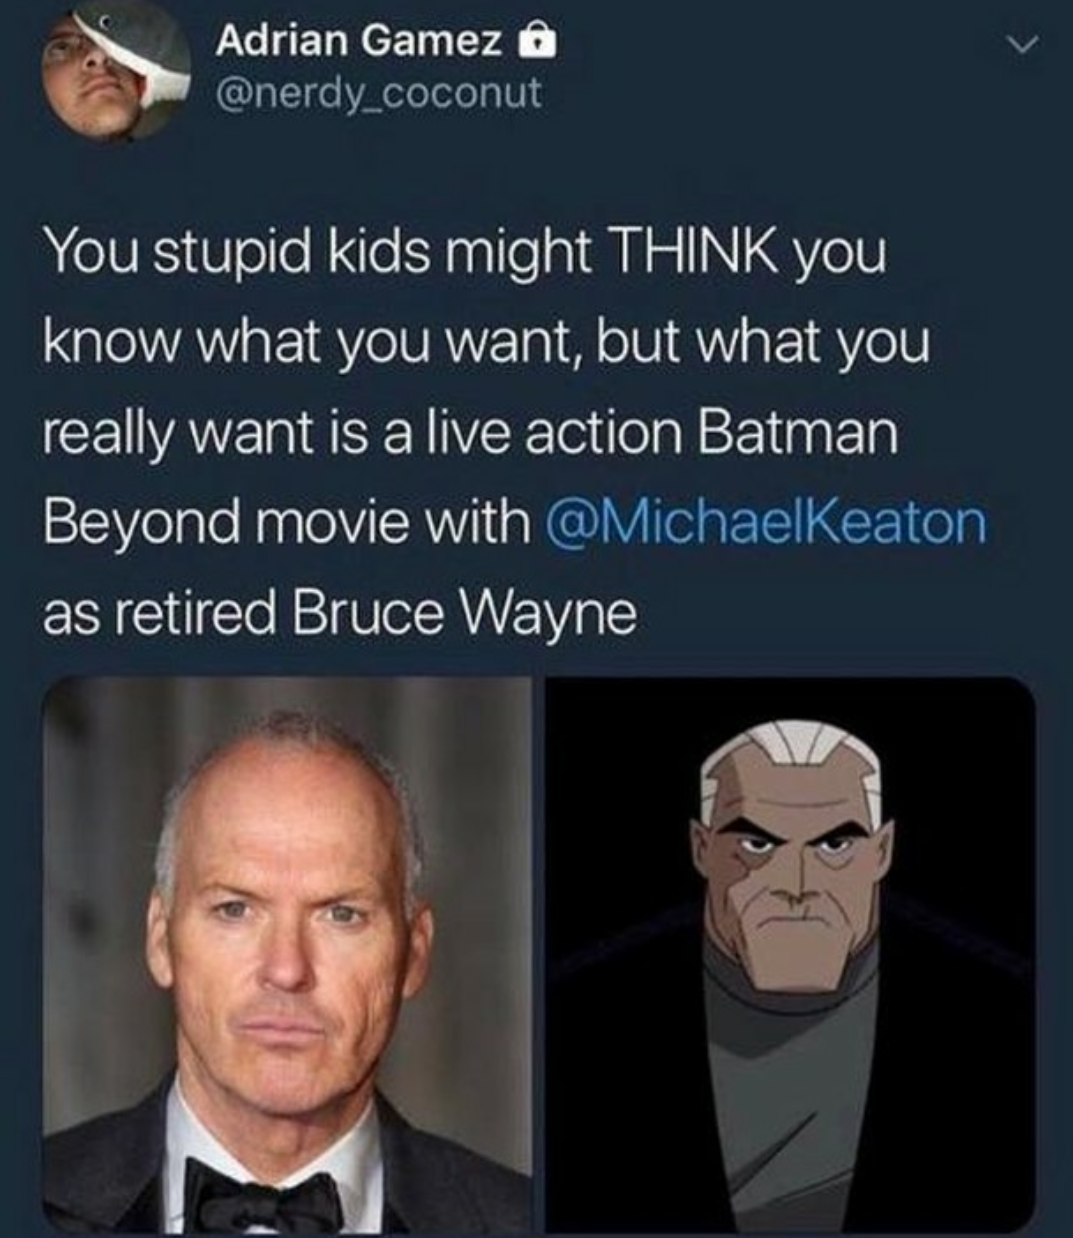 memes - batman beyond michael keaton - Adrian Gamez a You stupid kids might Think you 'know what you want, but what you 'really want is a live action Batman 'Beyond movie with as retired Bruce Wayne